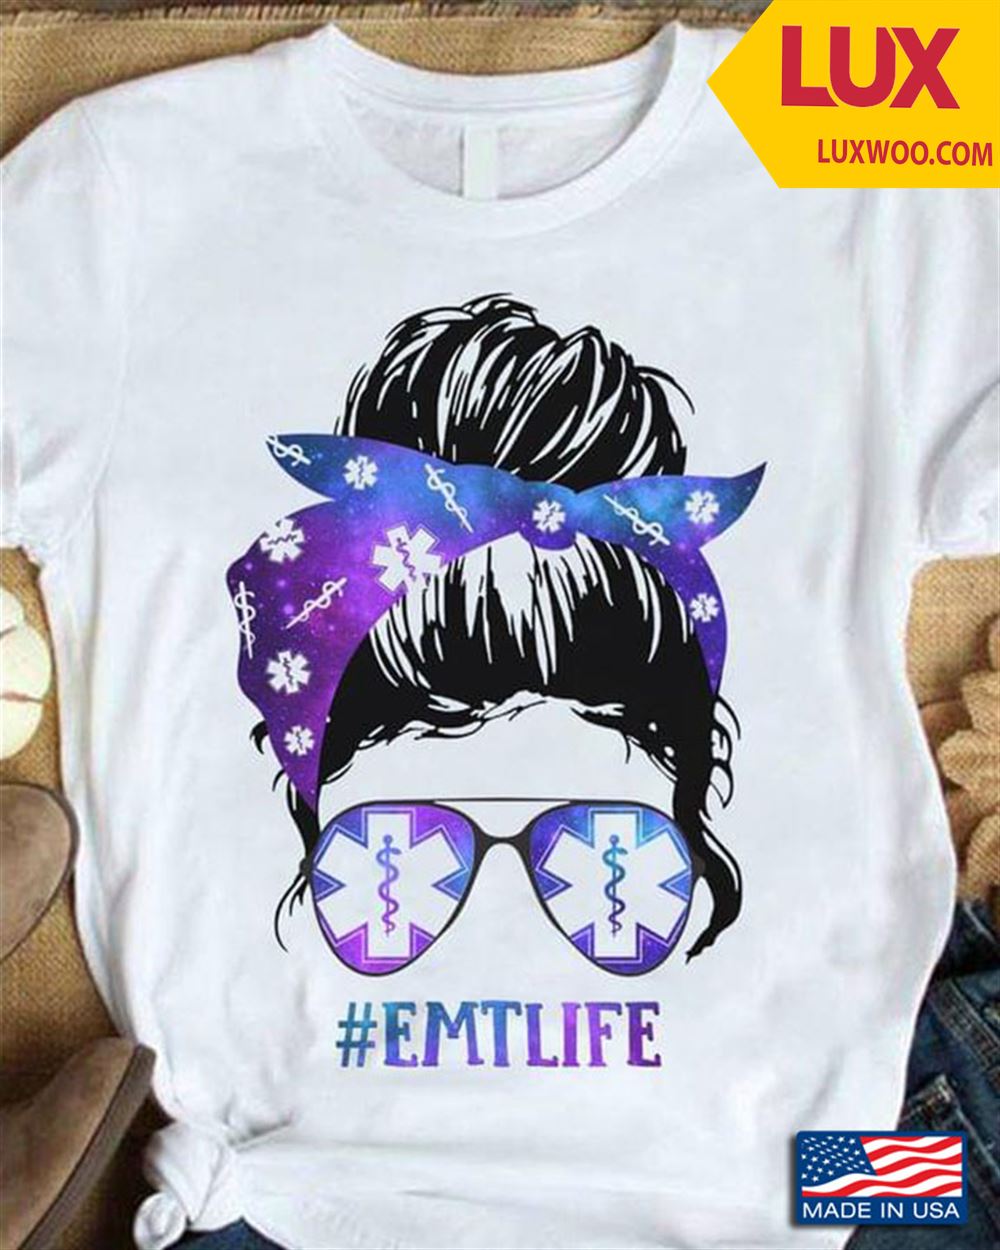 Emt Life Woman With Headband And Glasses Shirt Size Up To 5xl